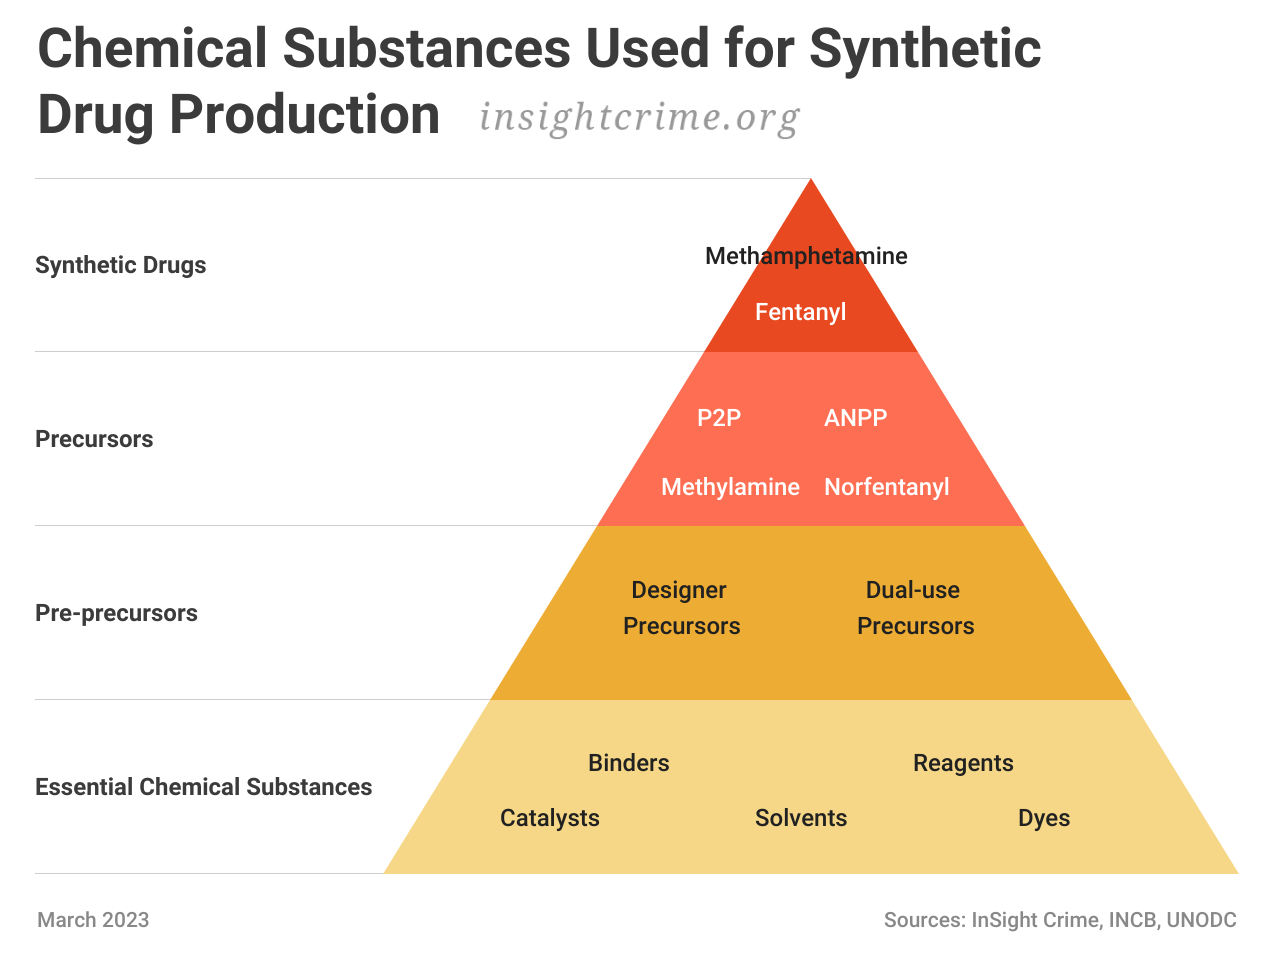 InSight Crime graphic explaining different types of substances and chemical precursors used to make methamphetamine and fentanyl.